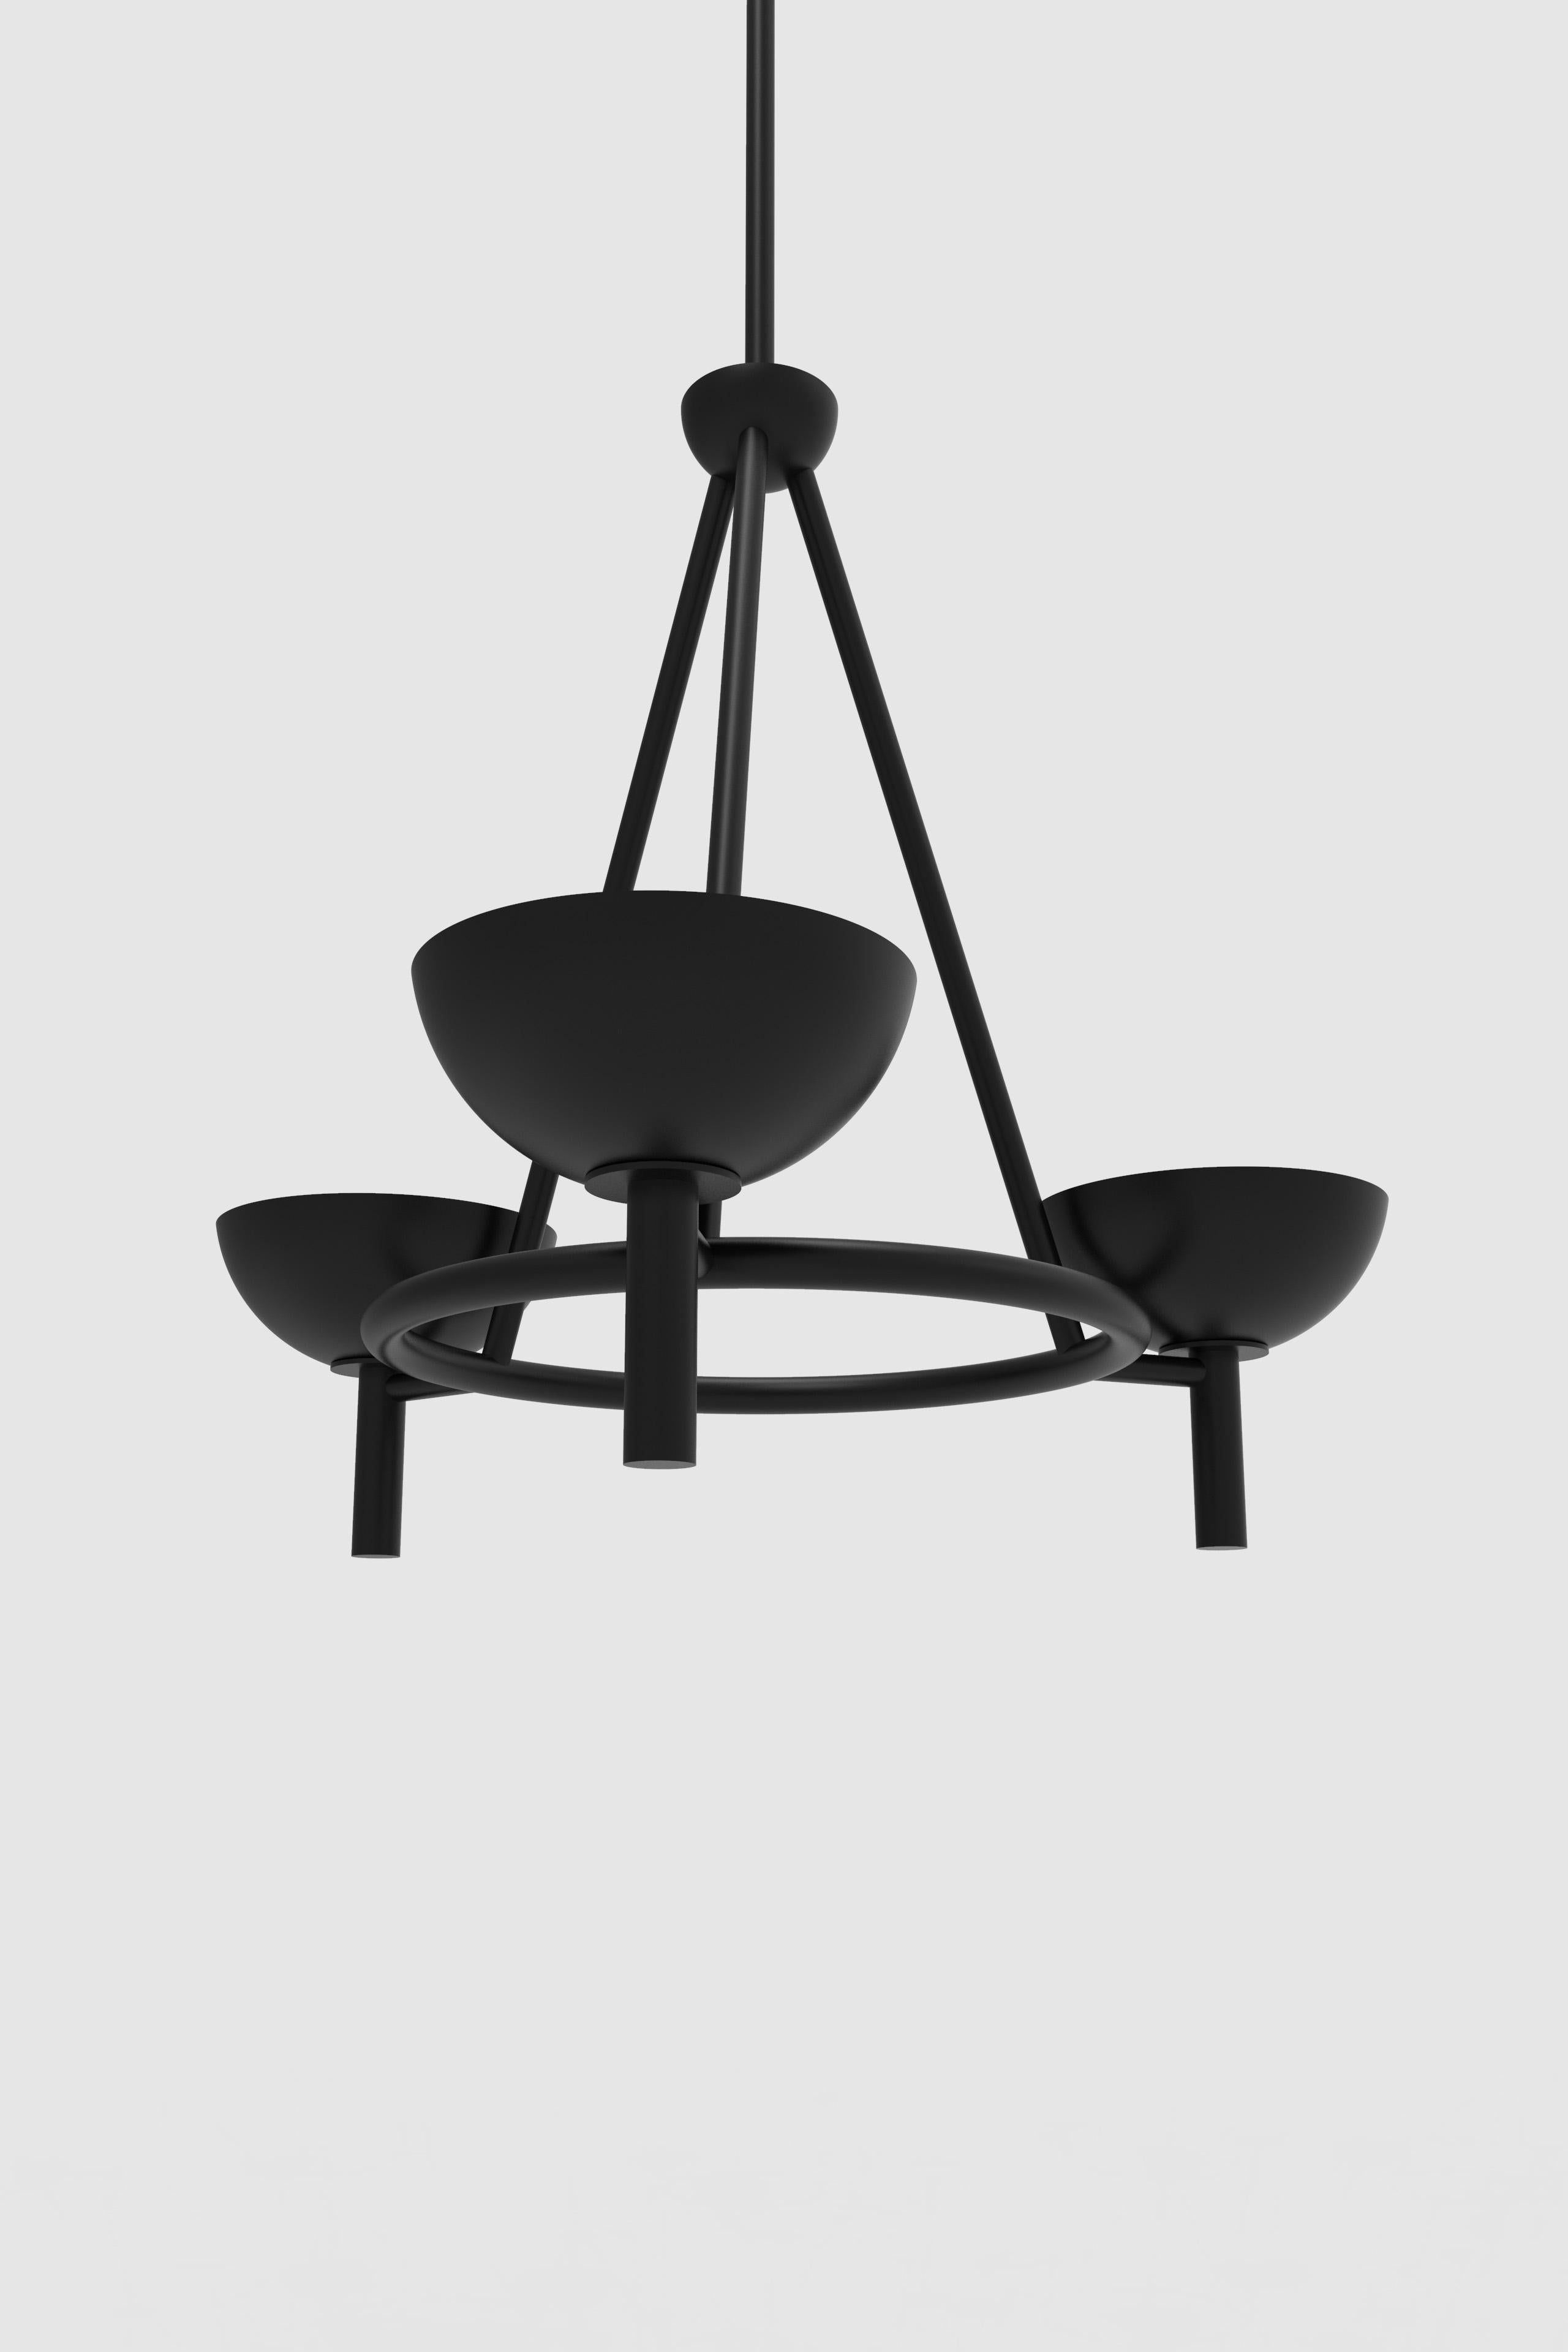 Orphan Work 200 Chandelier BLK
Shown in blackened brass
Available in brushed brass and blackened brass
Measures: 34” diameter x 24” height
Height to order
UL approved
Holds (3) 60W candelabra bulb
LED bulb recommended
Uplight with downlight by